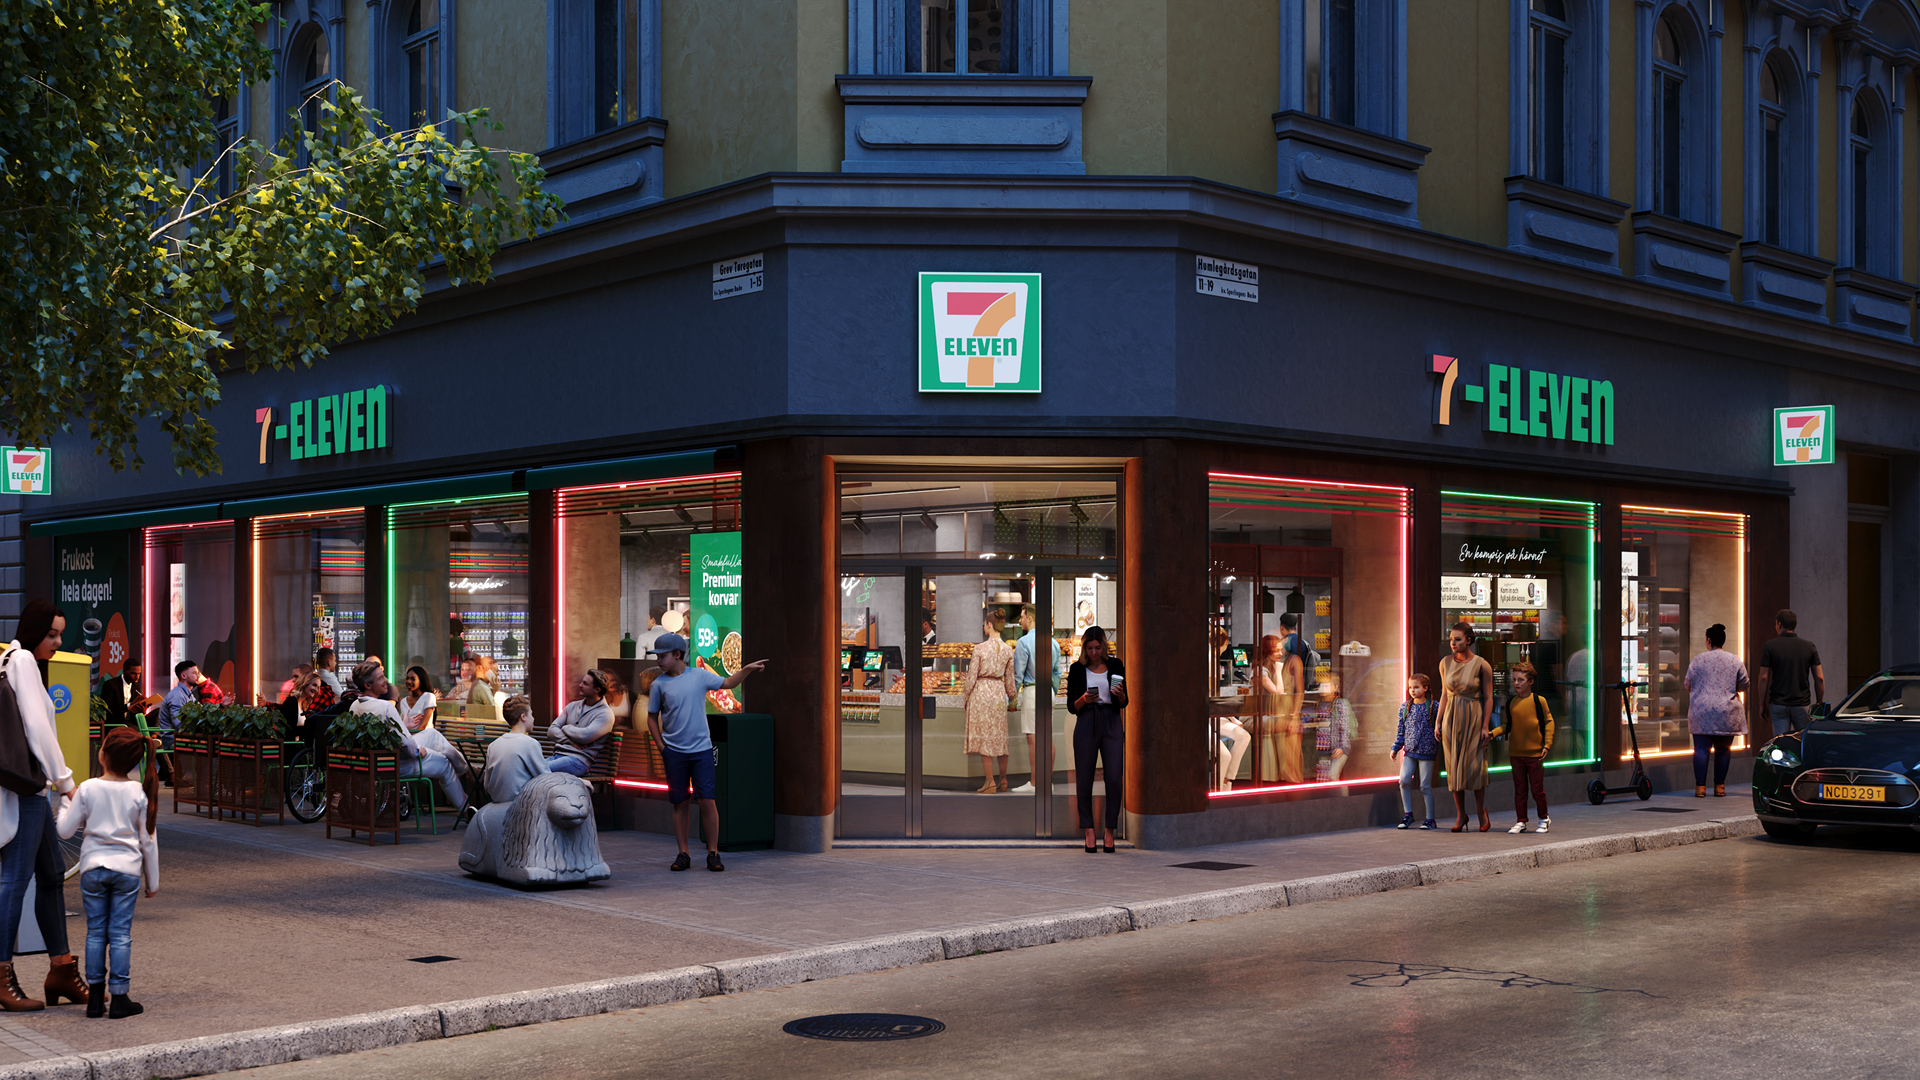 A new 7-Eleven for modern city life
